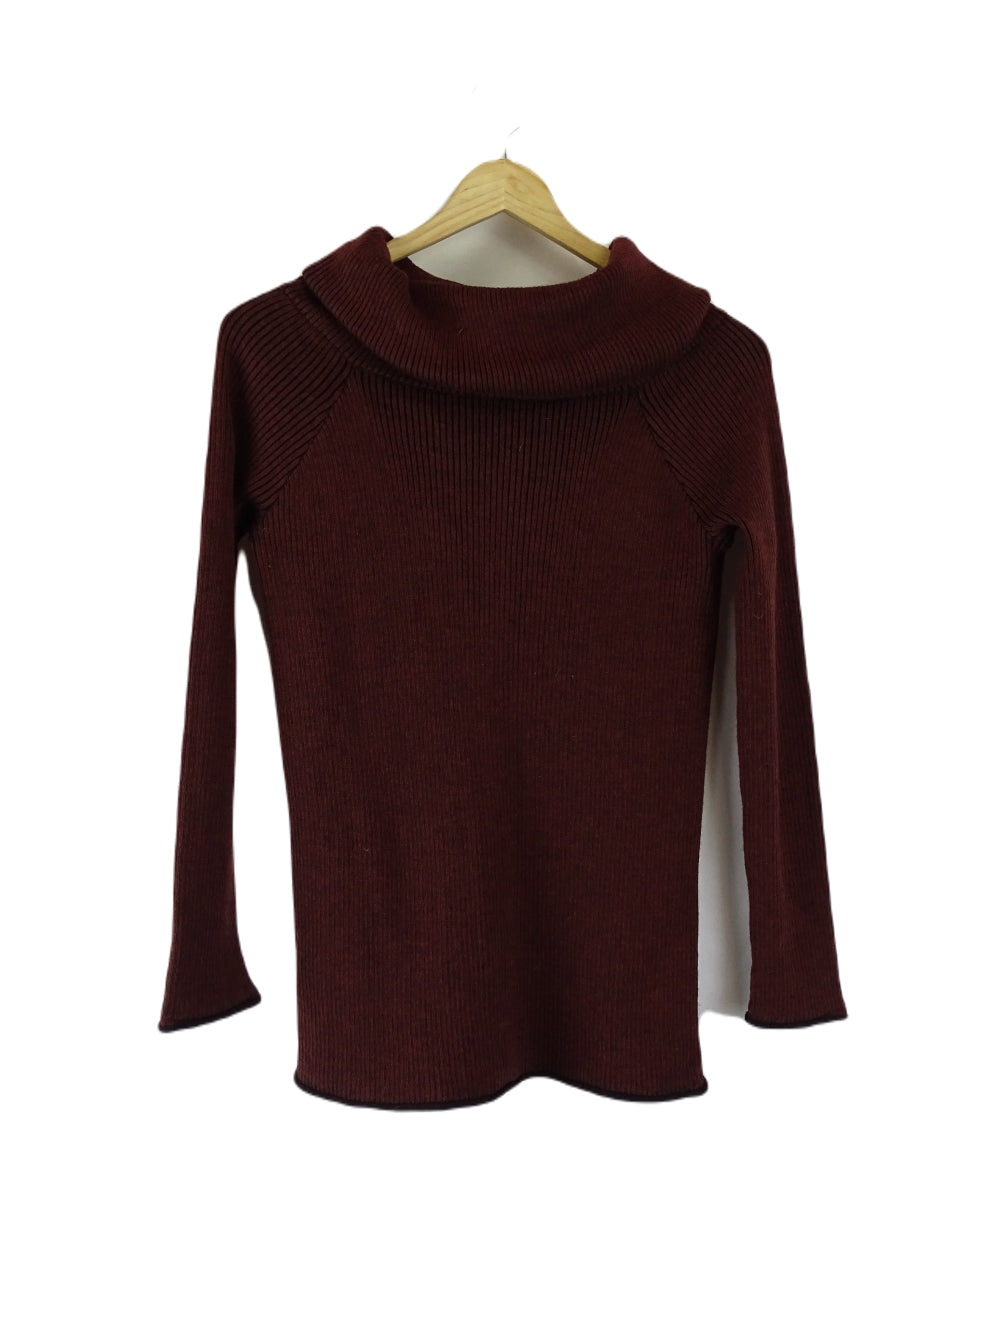 Country Road Brown Knit Jumper S